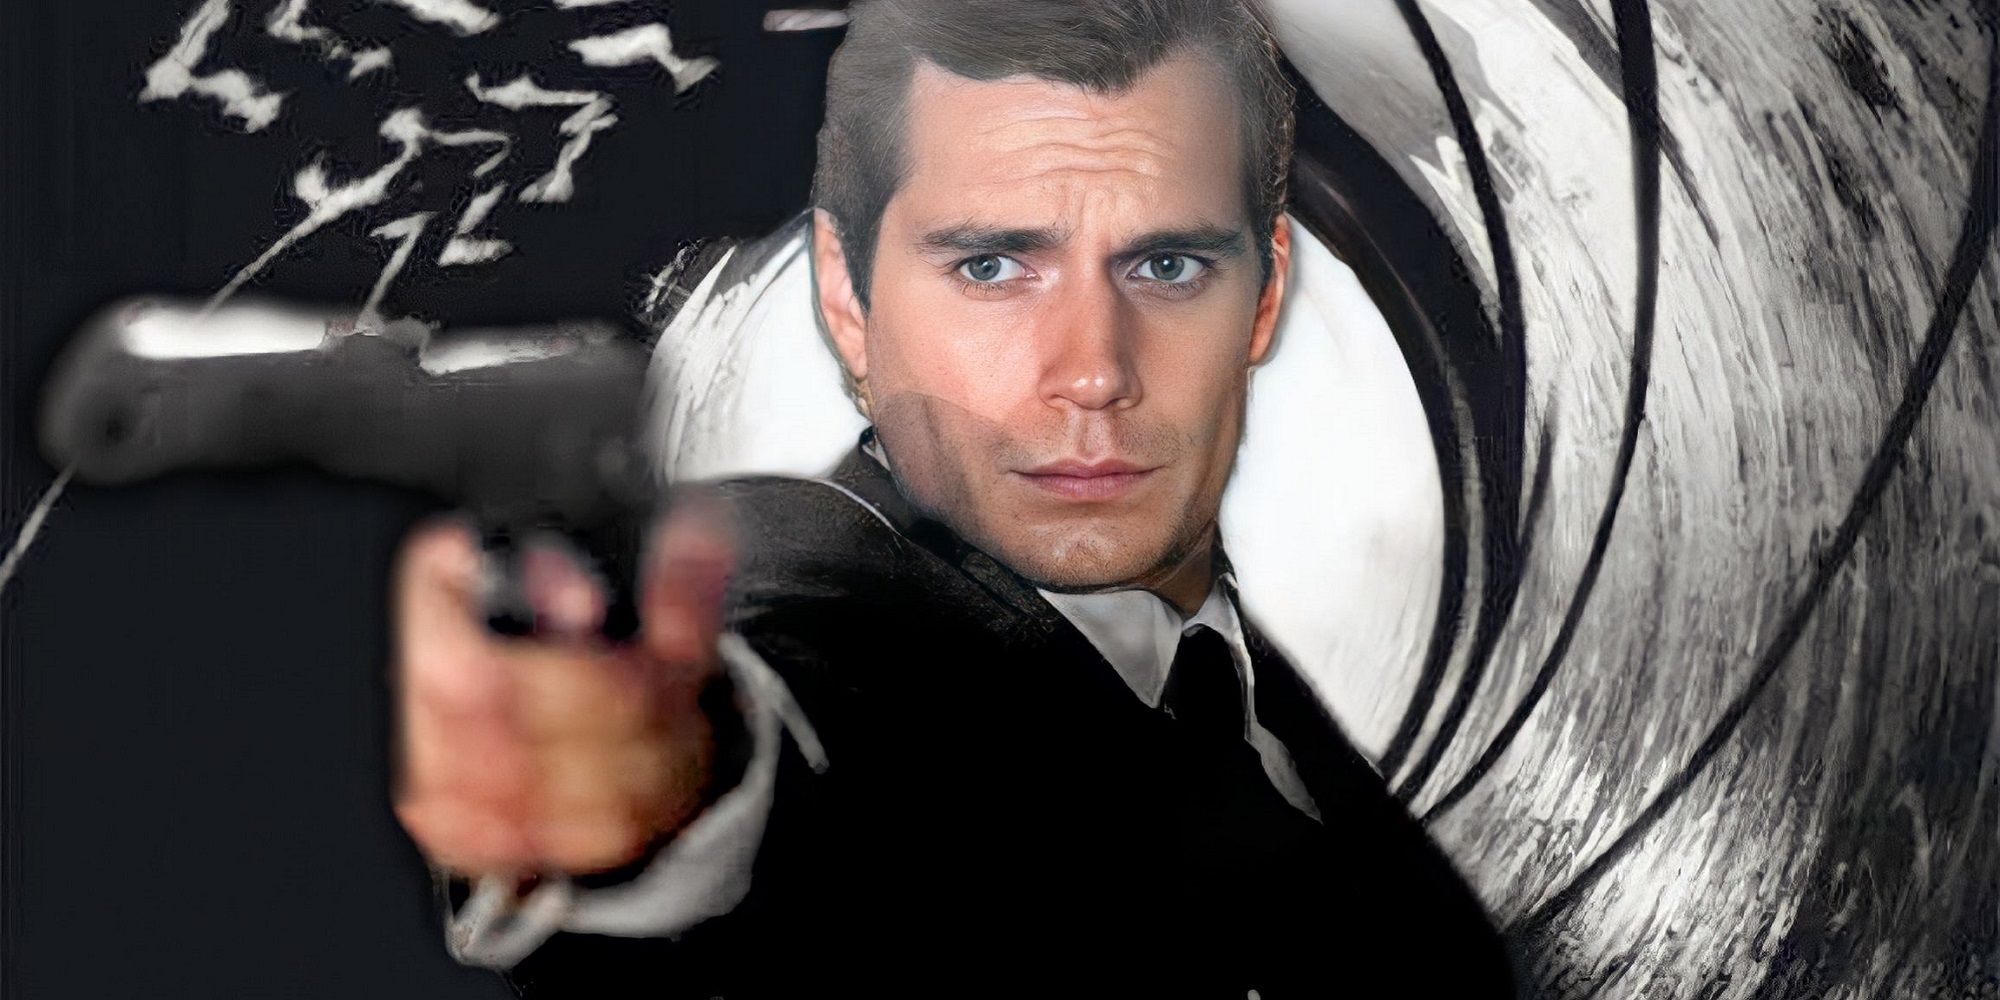 New Henry Cavill Movie's Rotten Tomatoes Record Is Good For His James Bond Prospects, But The Box Office Says Otherwise